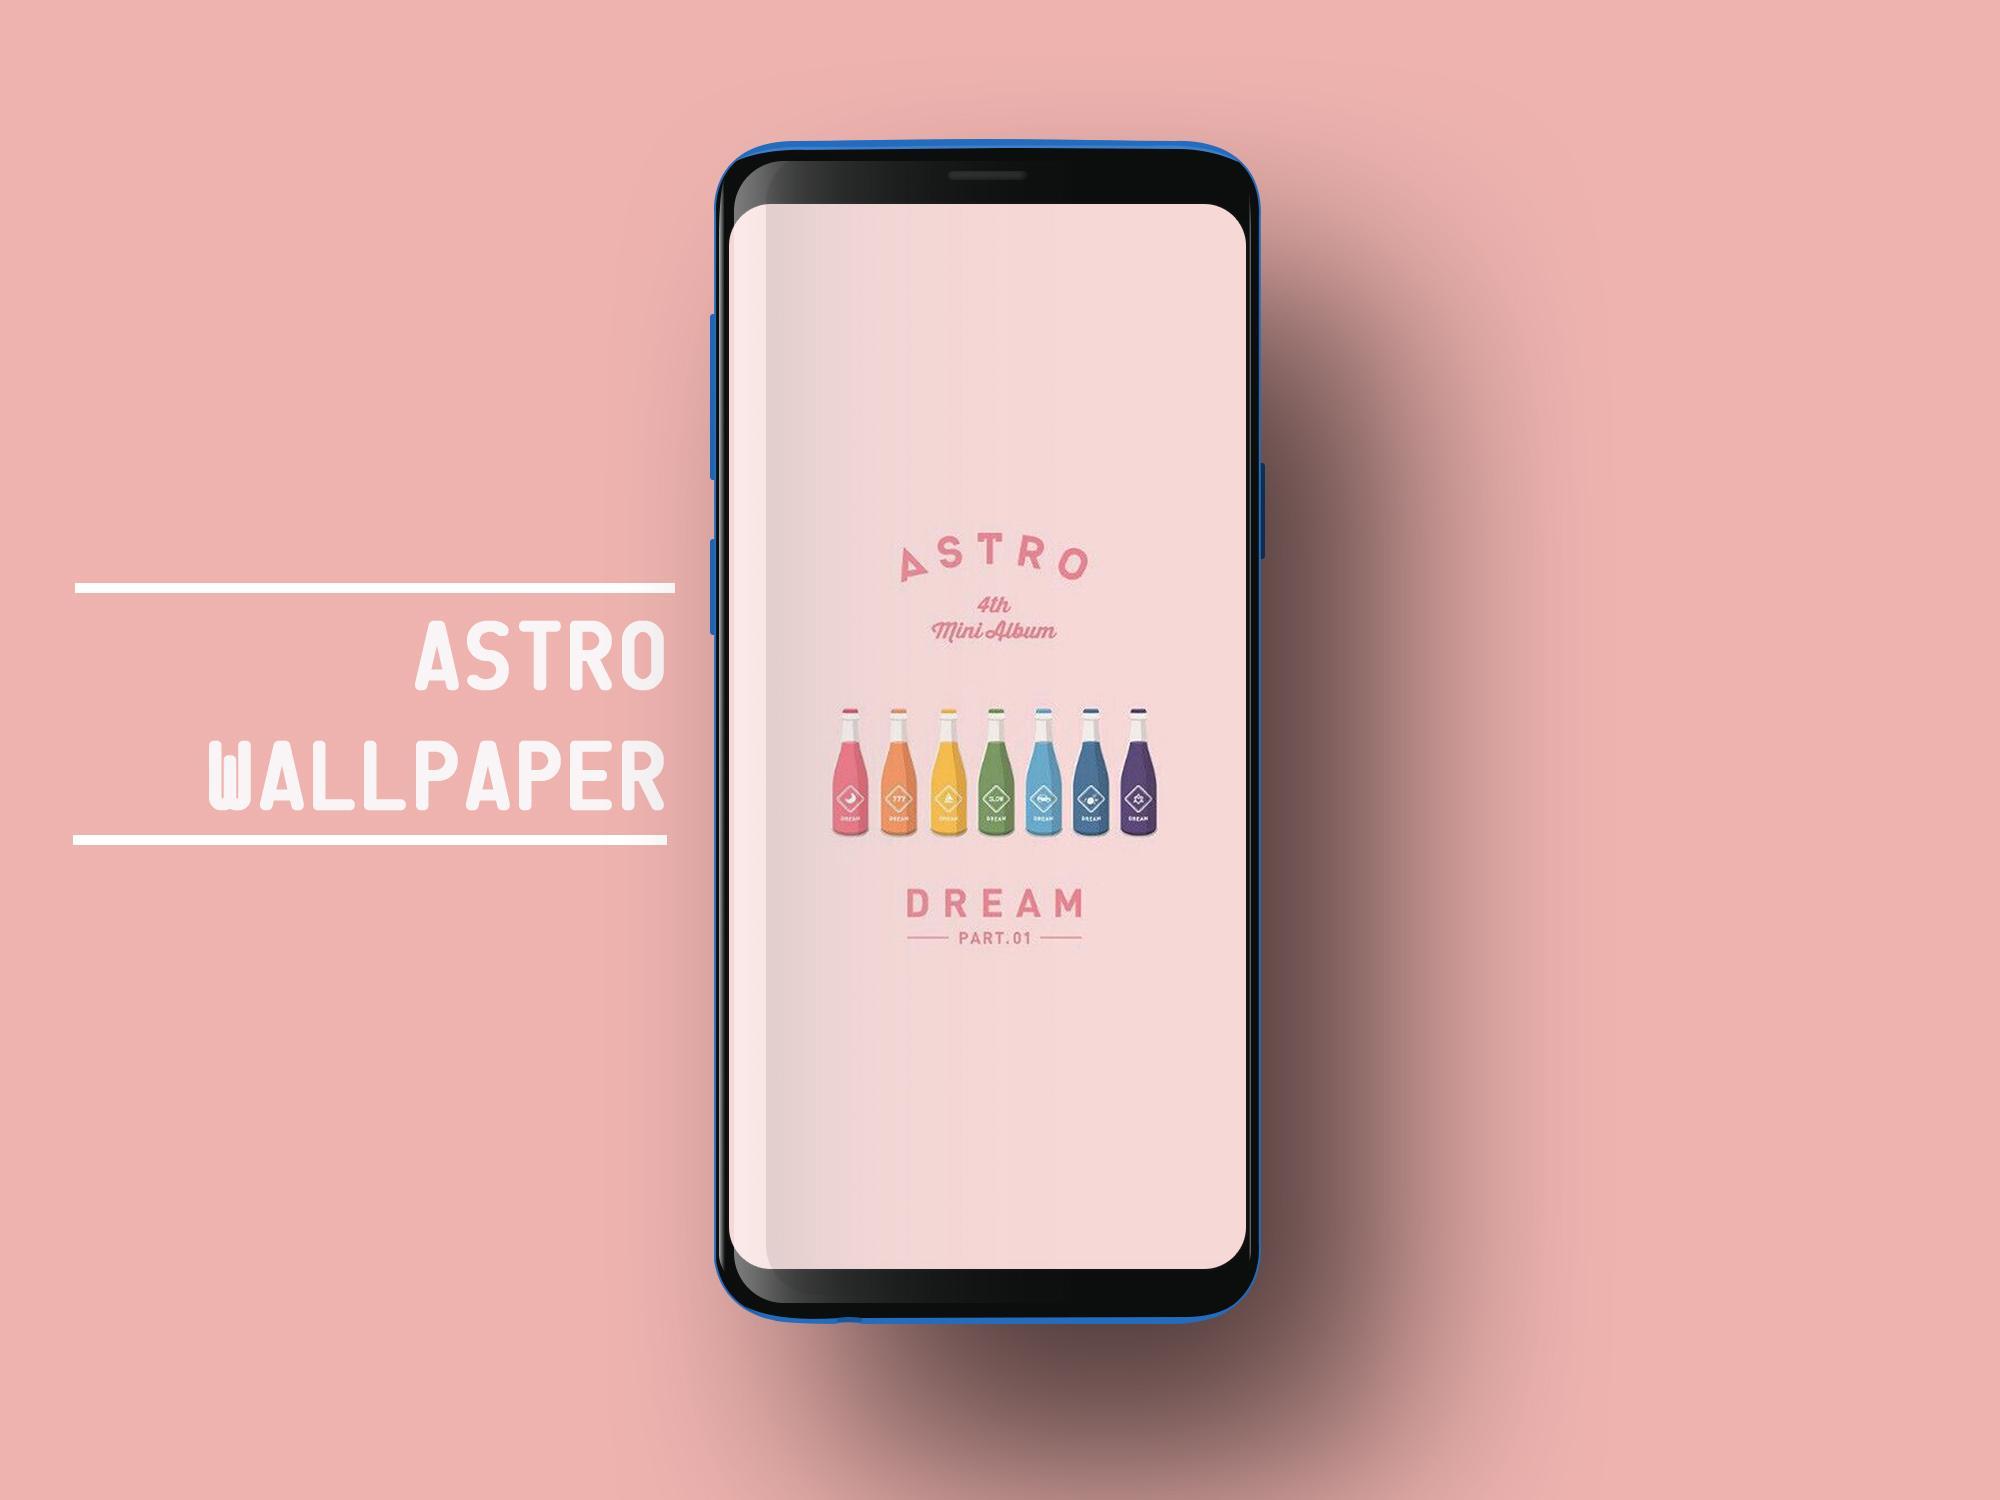 Astro Wallpapers Kpop Hd New For Android Apk Download